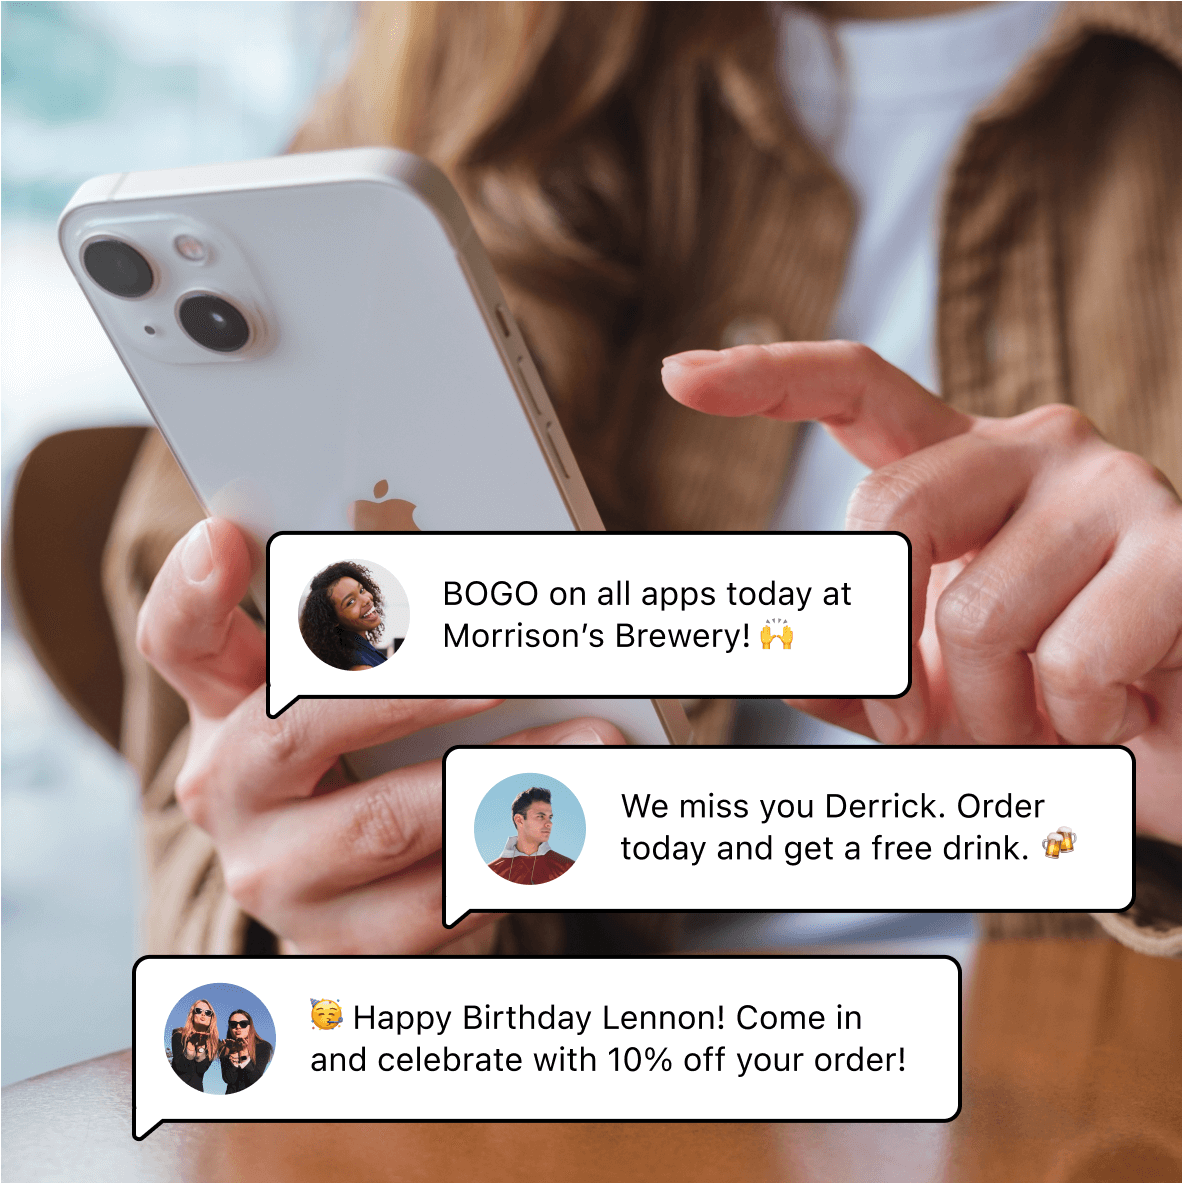 Text messages from marketing campaign popping up on a phone